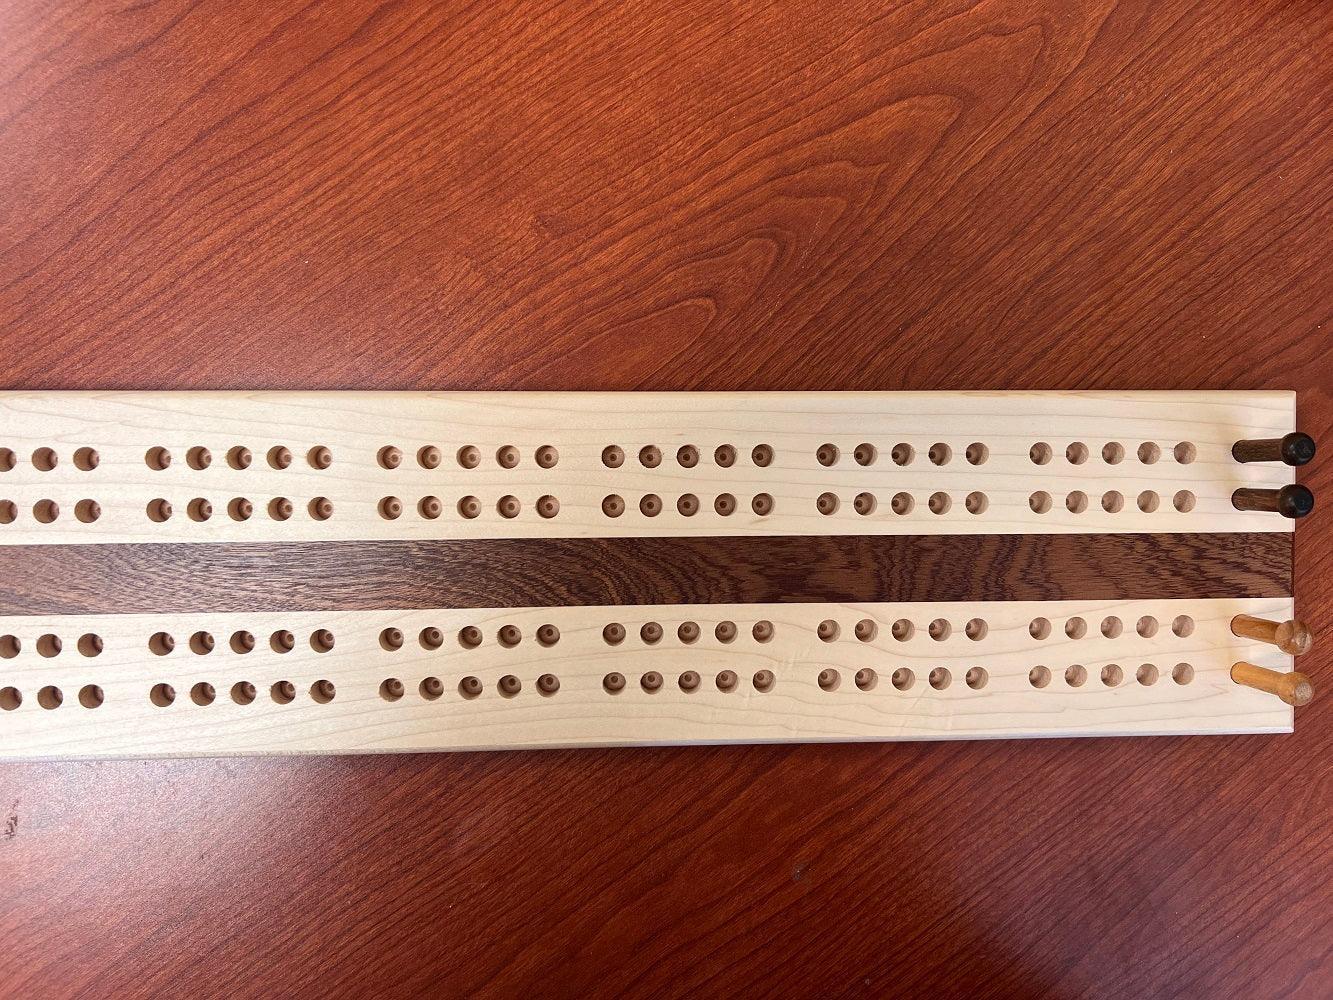 Jumbo Size Cribbage Board-Hand Crafted. - The Low Vision Store